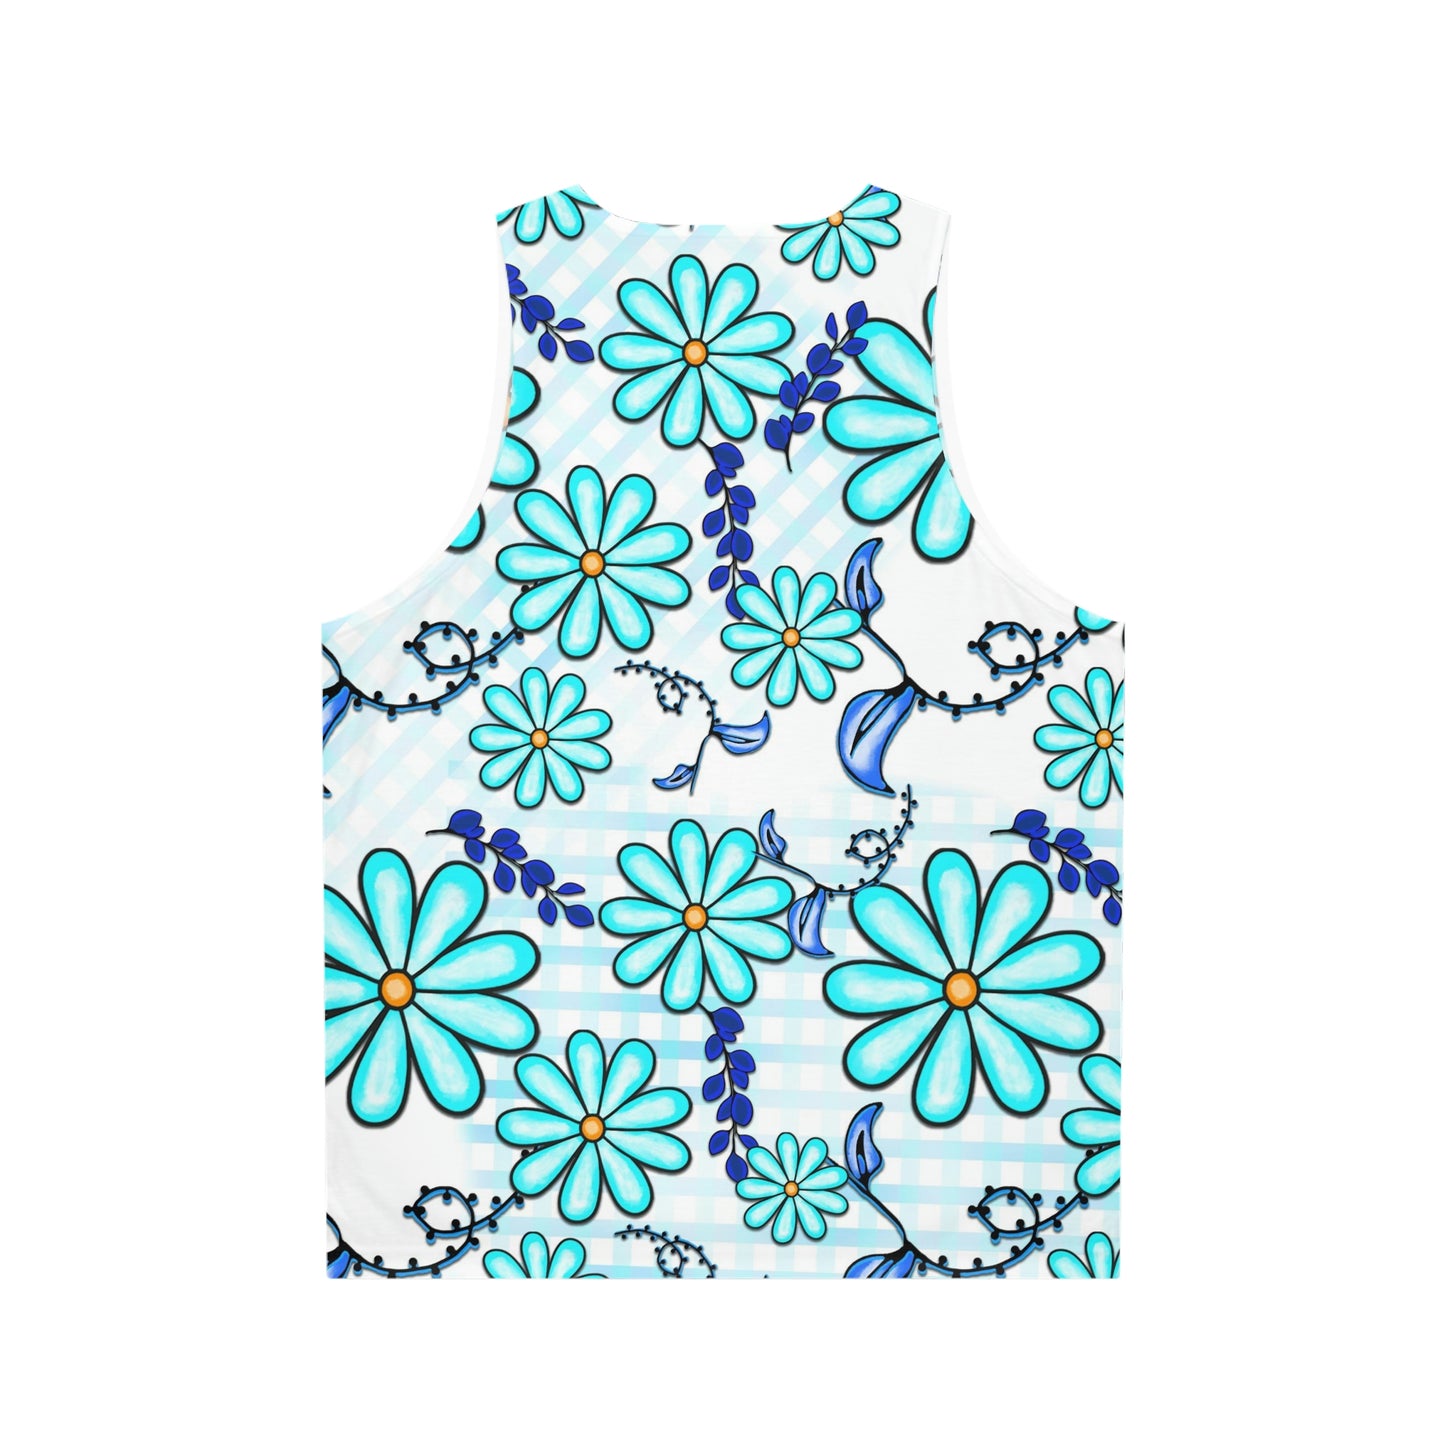 Blue Floral Daisy Unisex Style Tank Top Breezy Summer Casual Wear for Beach, Lake, Camping or Shopping, Stylish, Layer for Variety